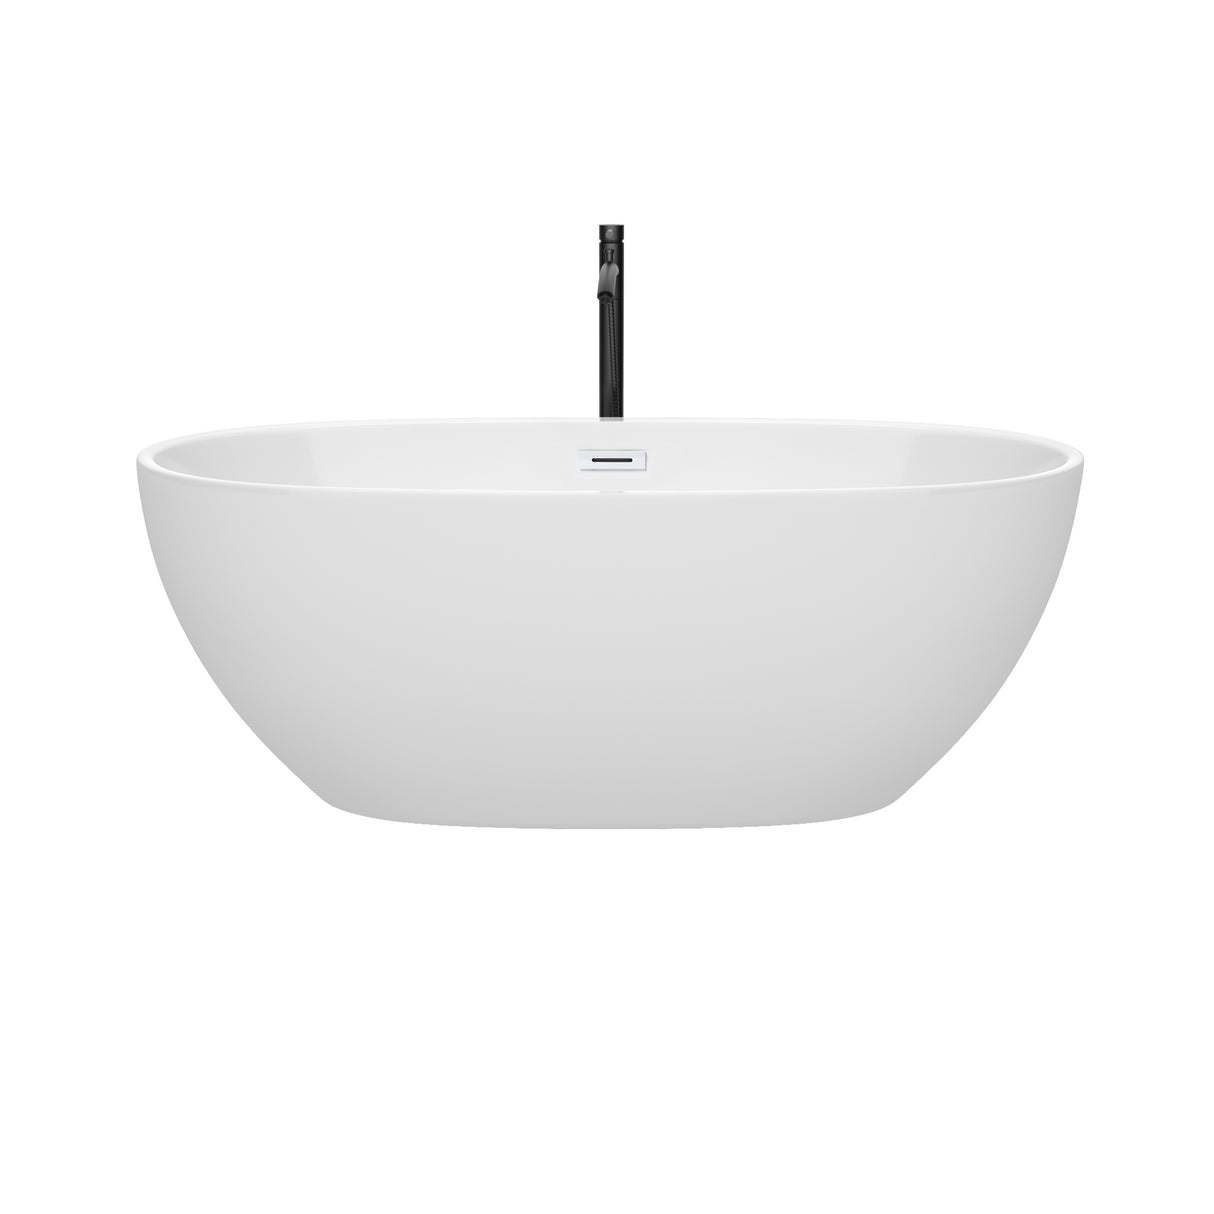 Juno 63 Inch Freestanding Bathtub in White with Shiny White Trim and Floor Mounted Faucet in Matte Black